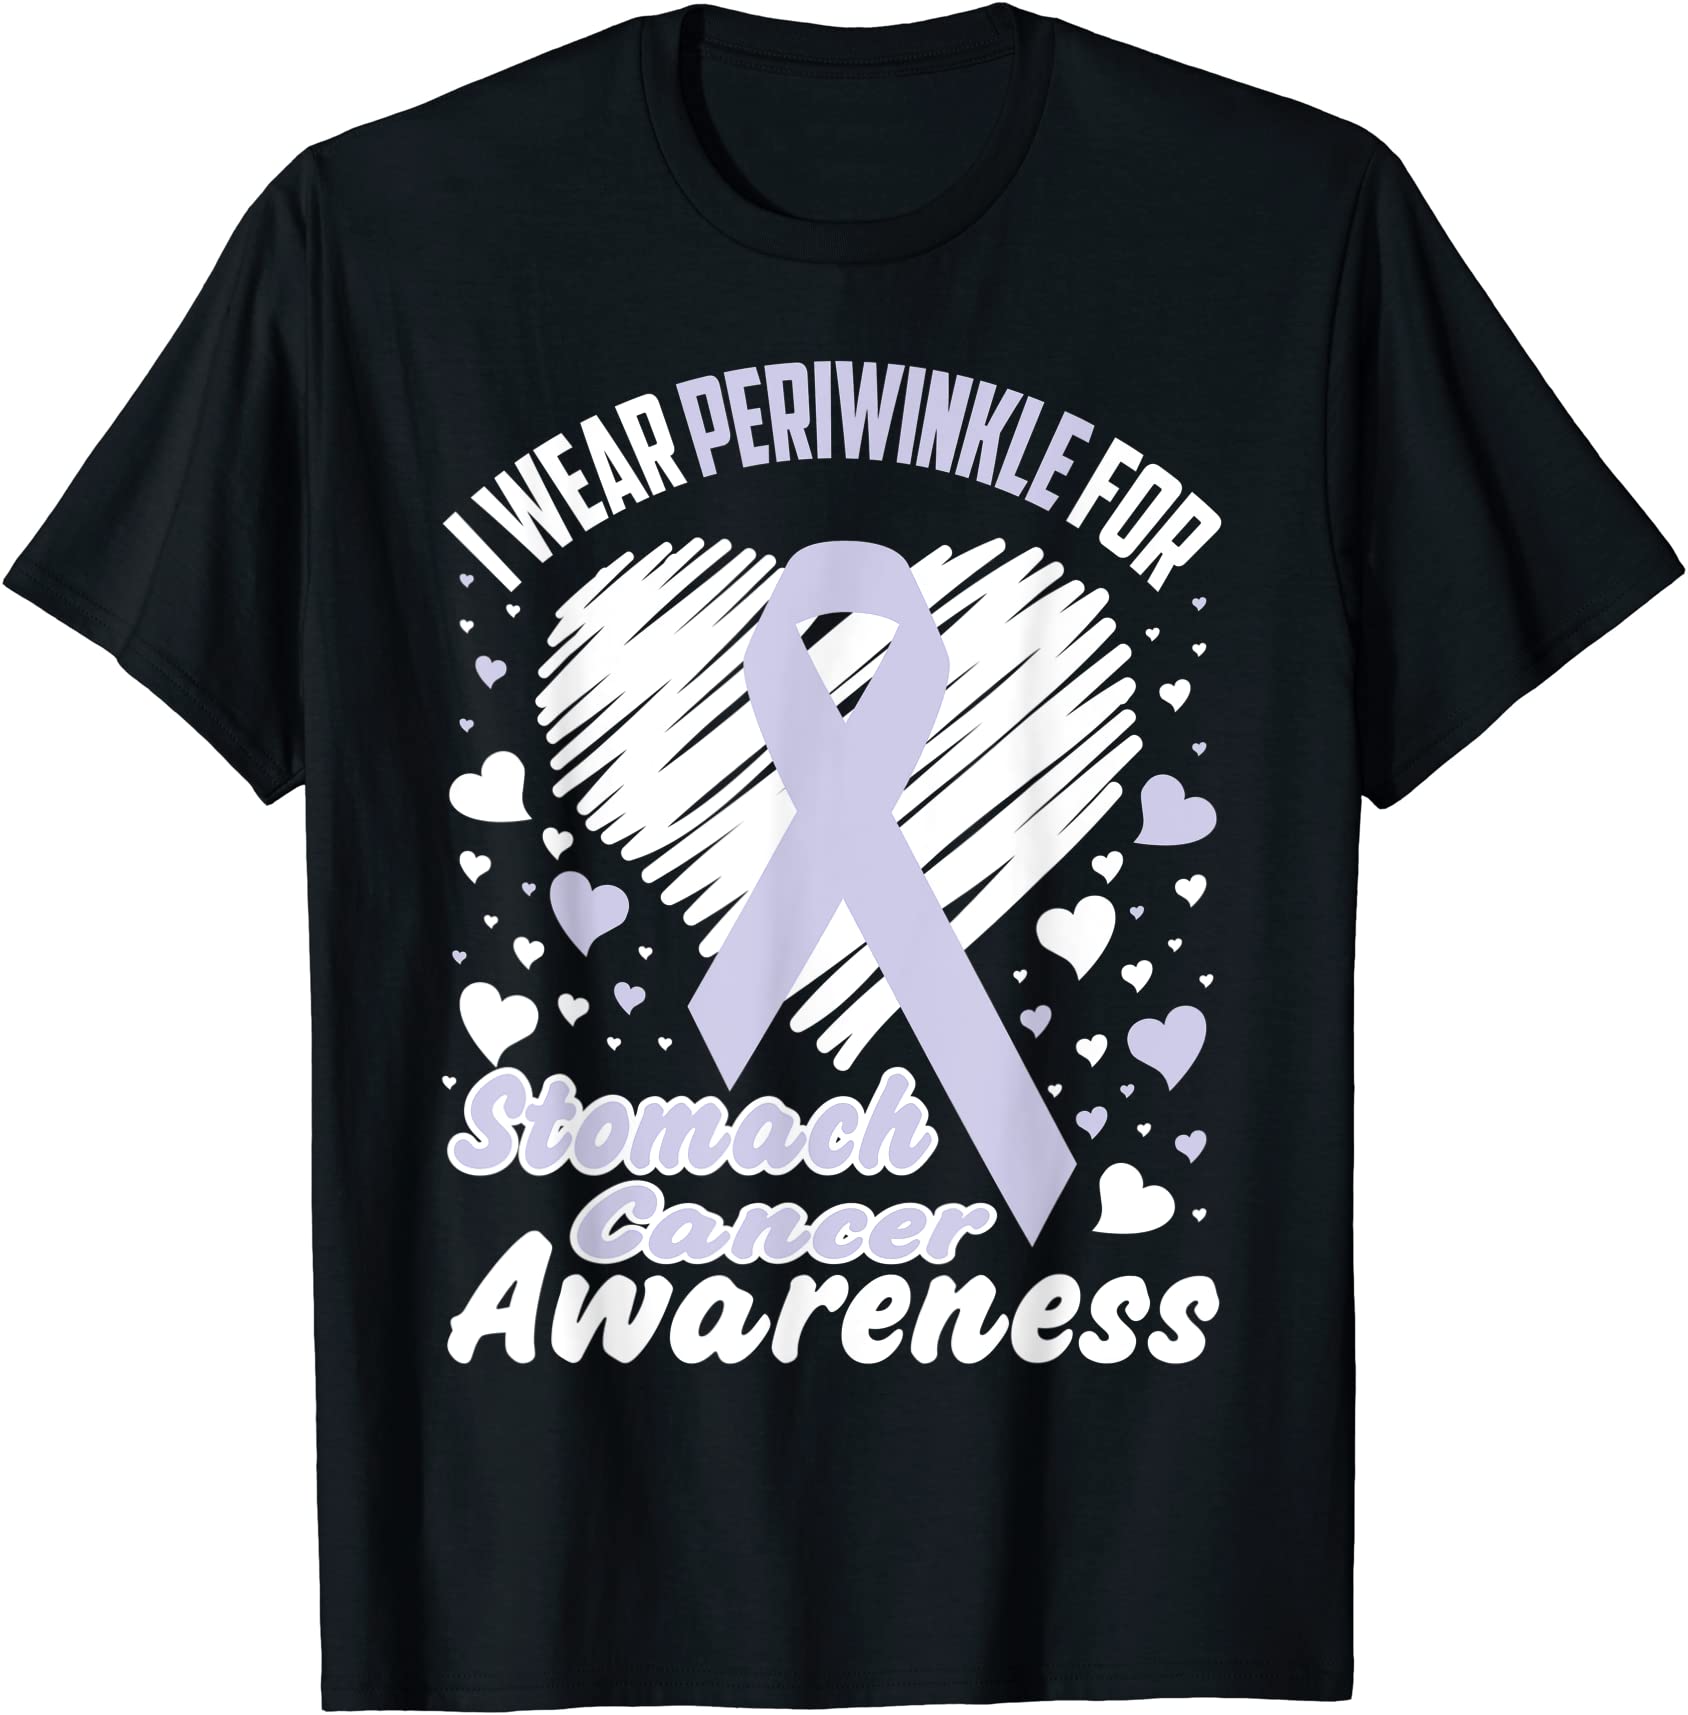 i wear periwinkle for stomach cancer awareness shirt t shirt men - Buy ...